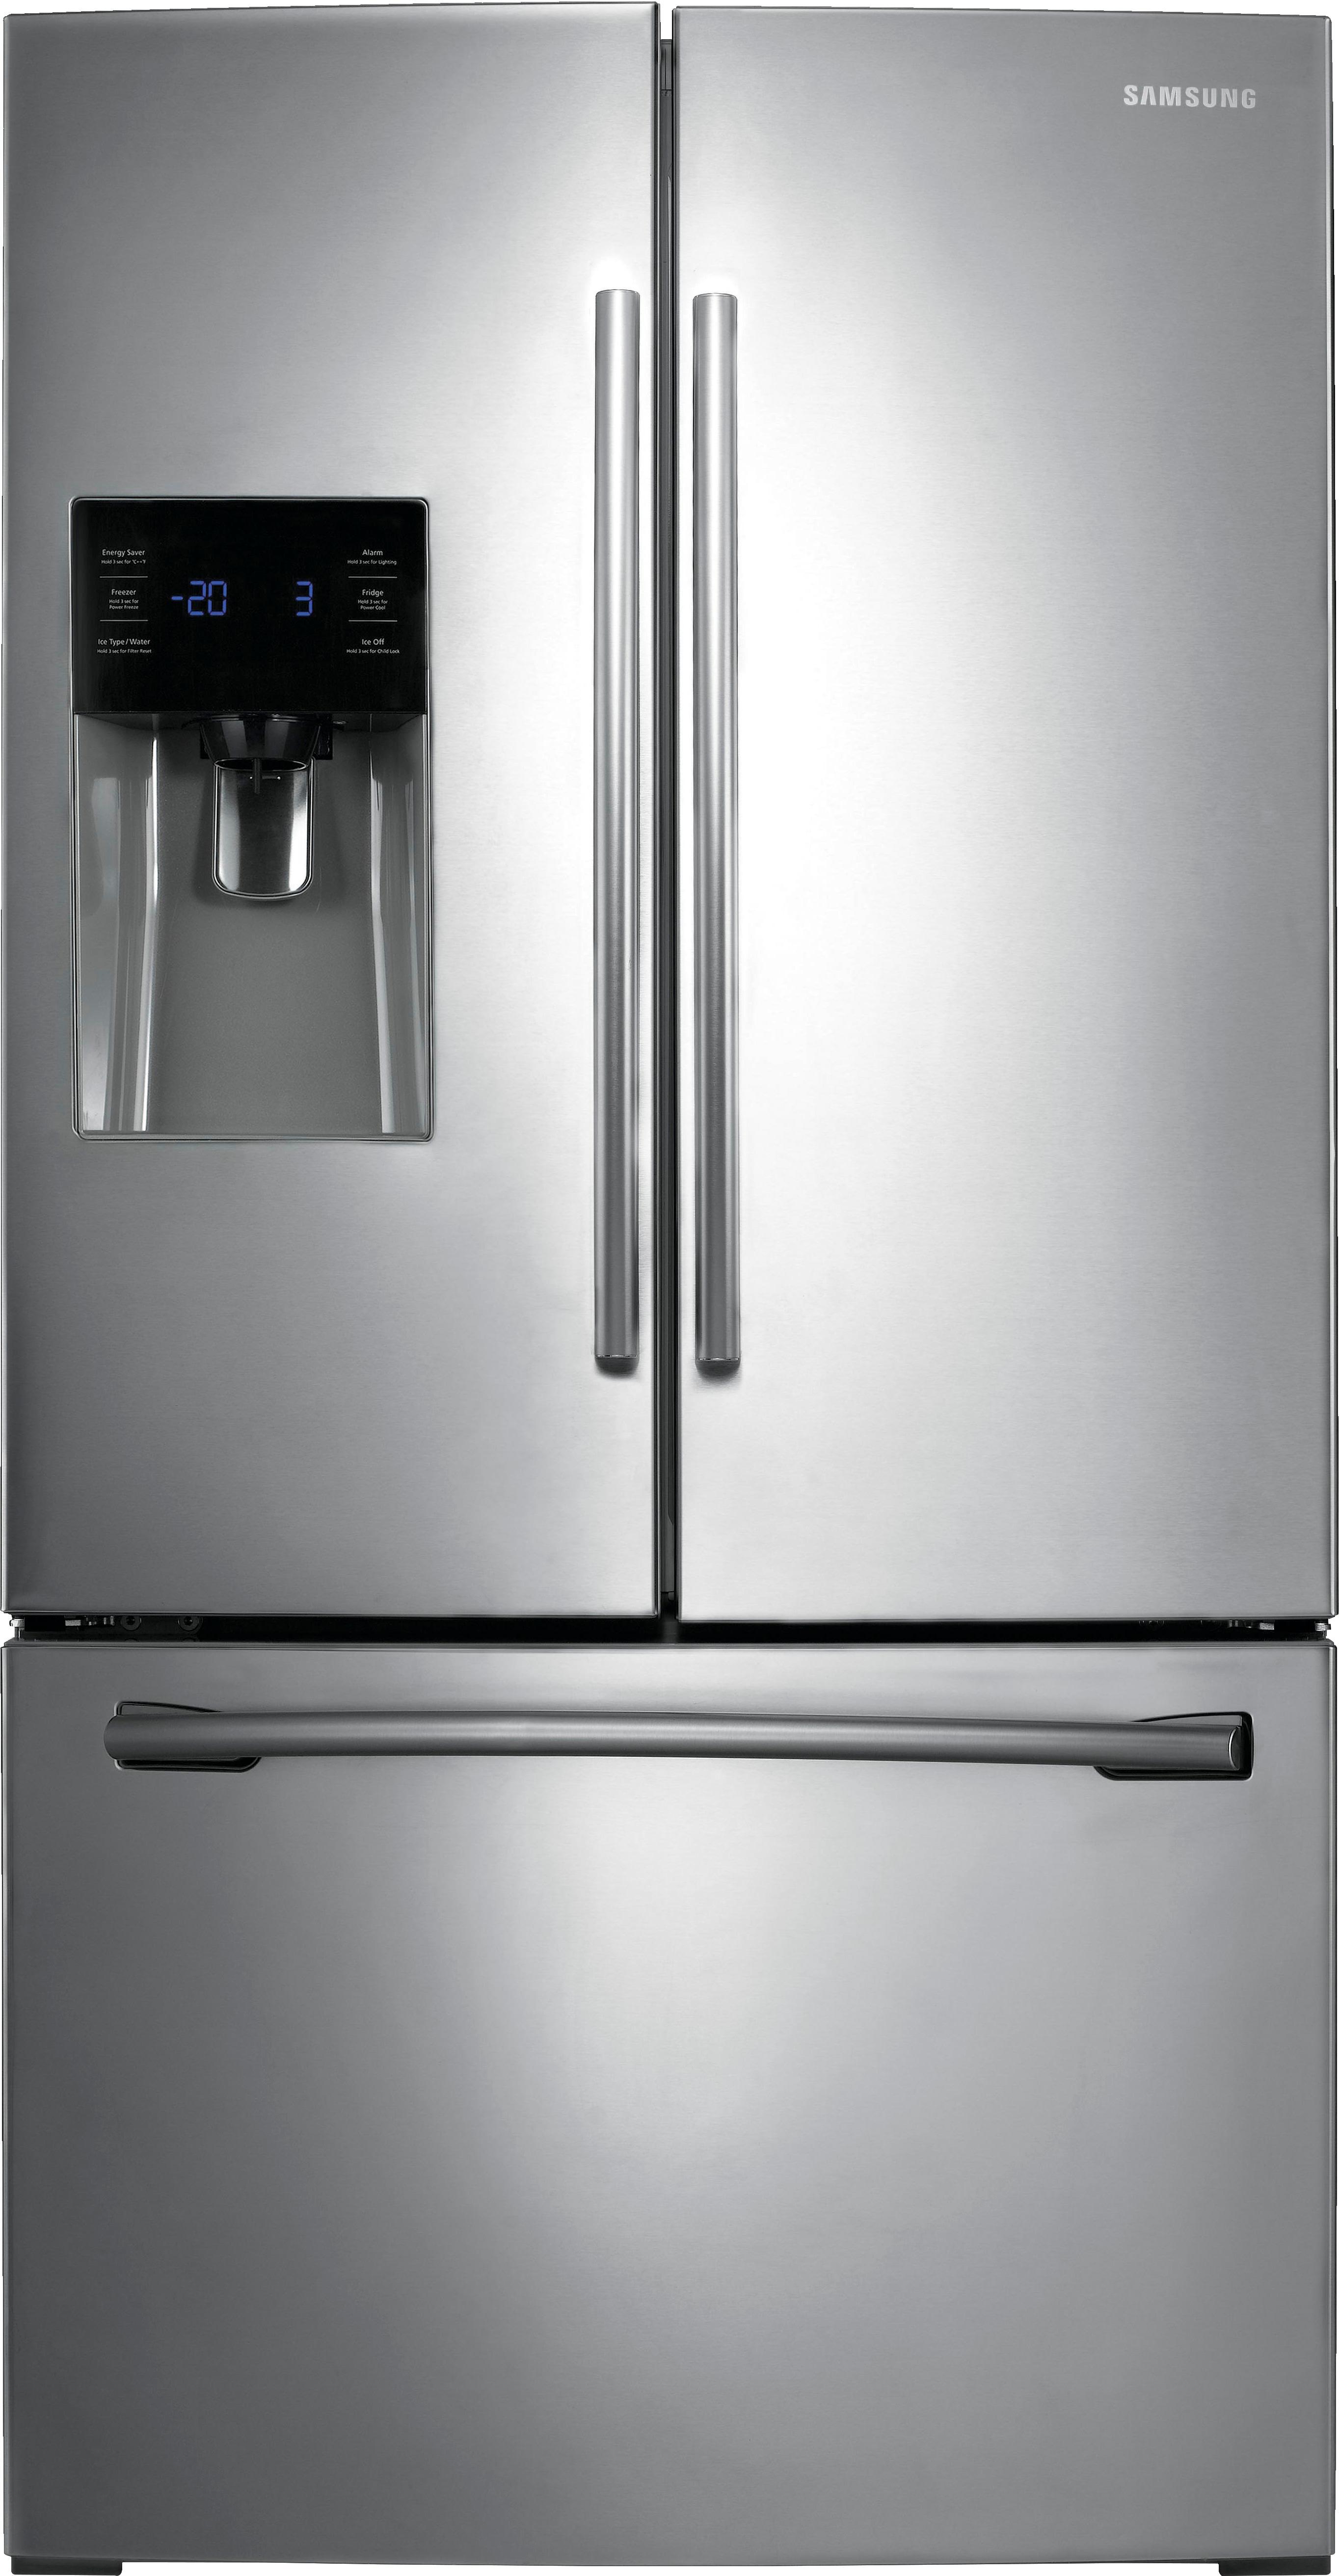 How To Open The Ice Maker In A Samsung Fridge – Press To Cook